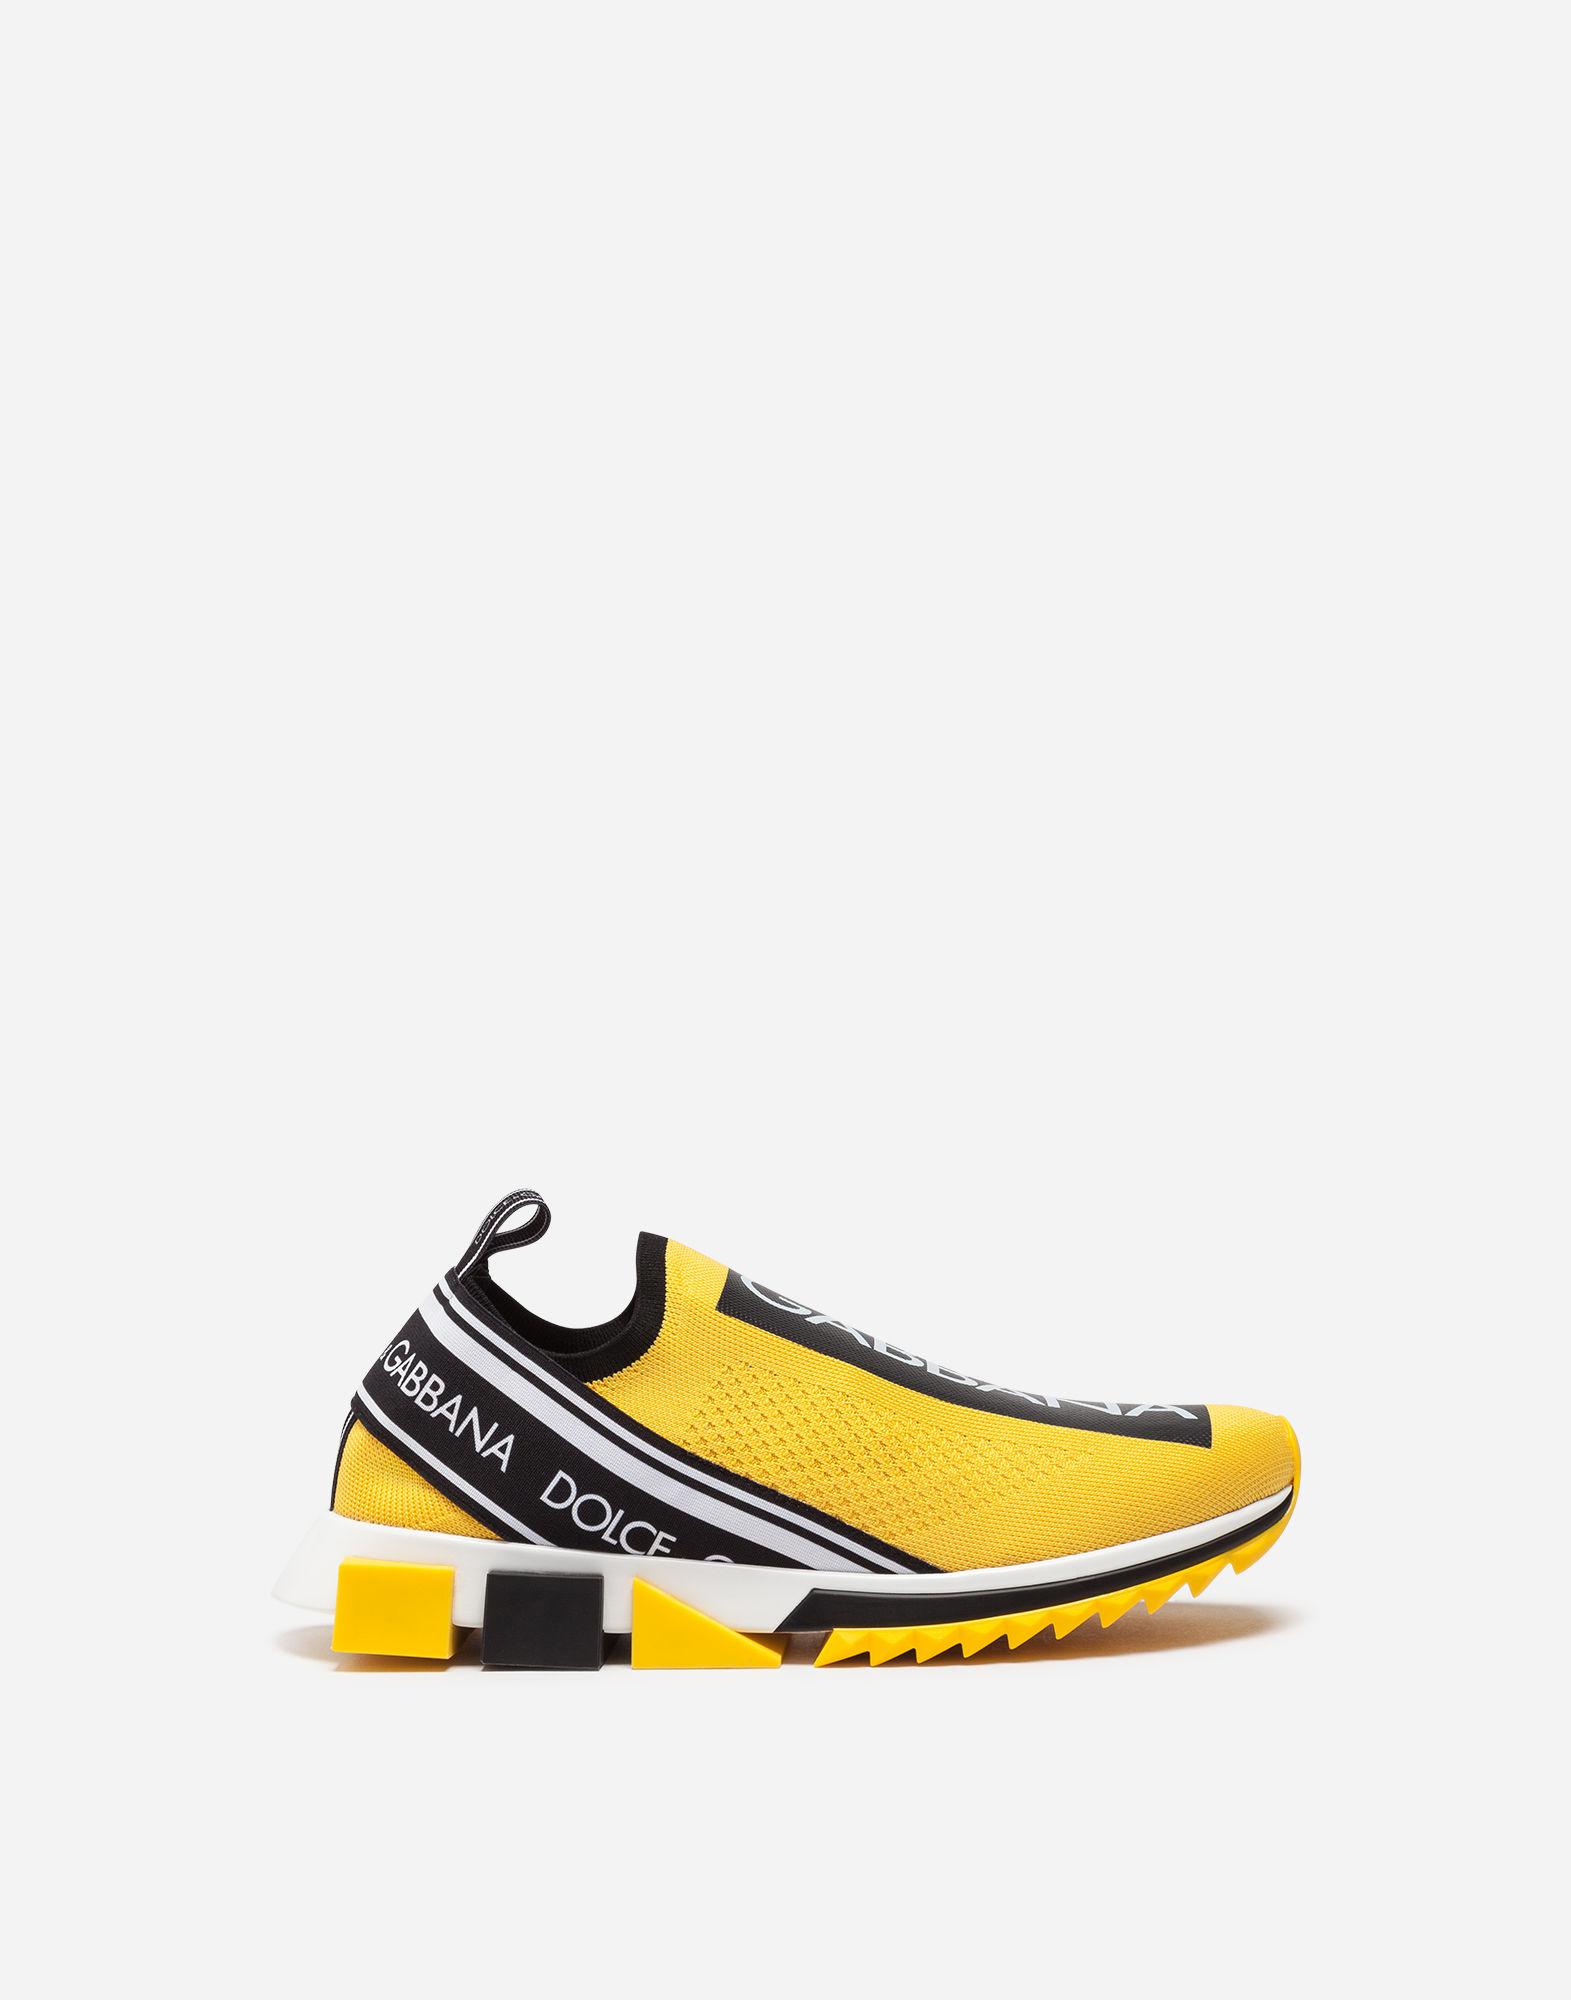 Lyst - Dolce & Gabbana Sorrento Sneakers in Yellow for Men - Save 0. ...